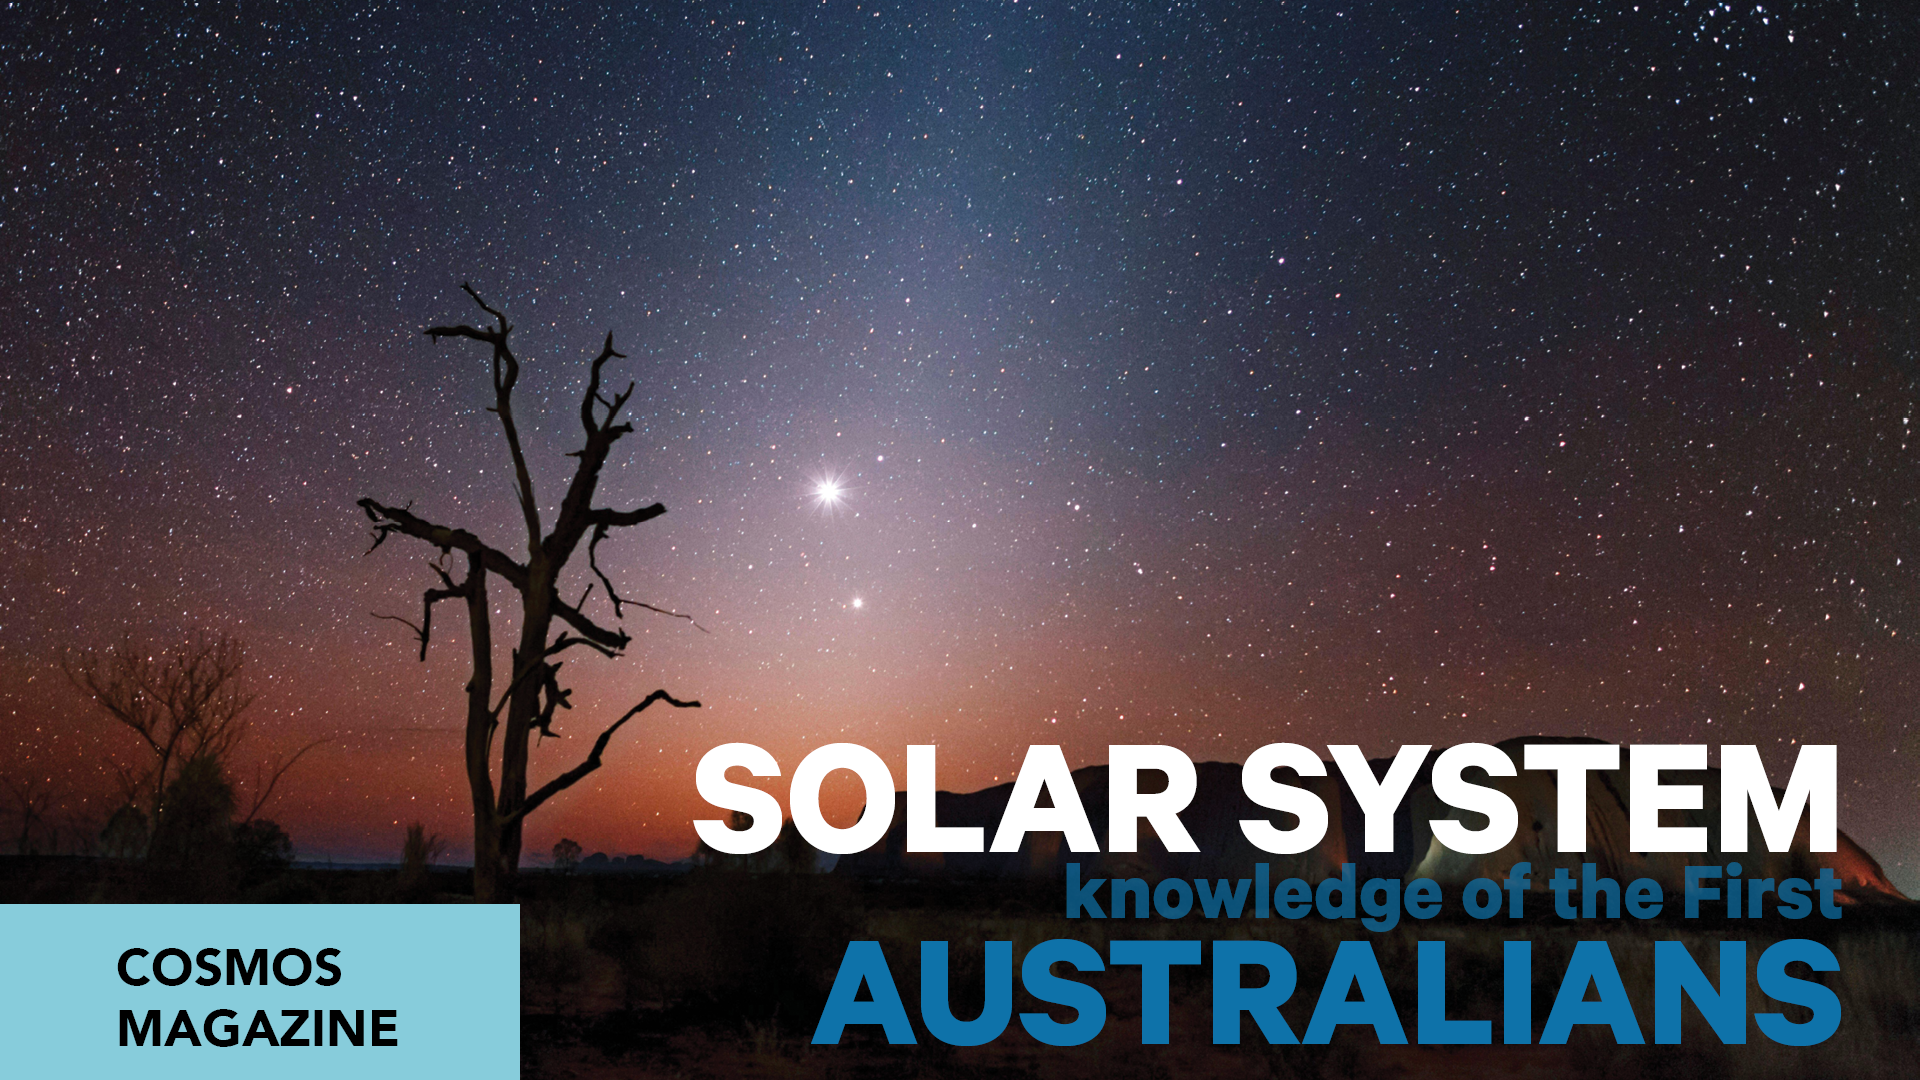 COSMOS MAGAZINE – Solar System Knowledge of the First Australians